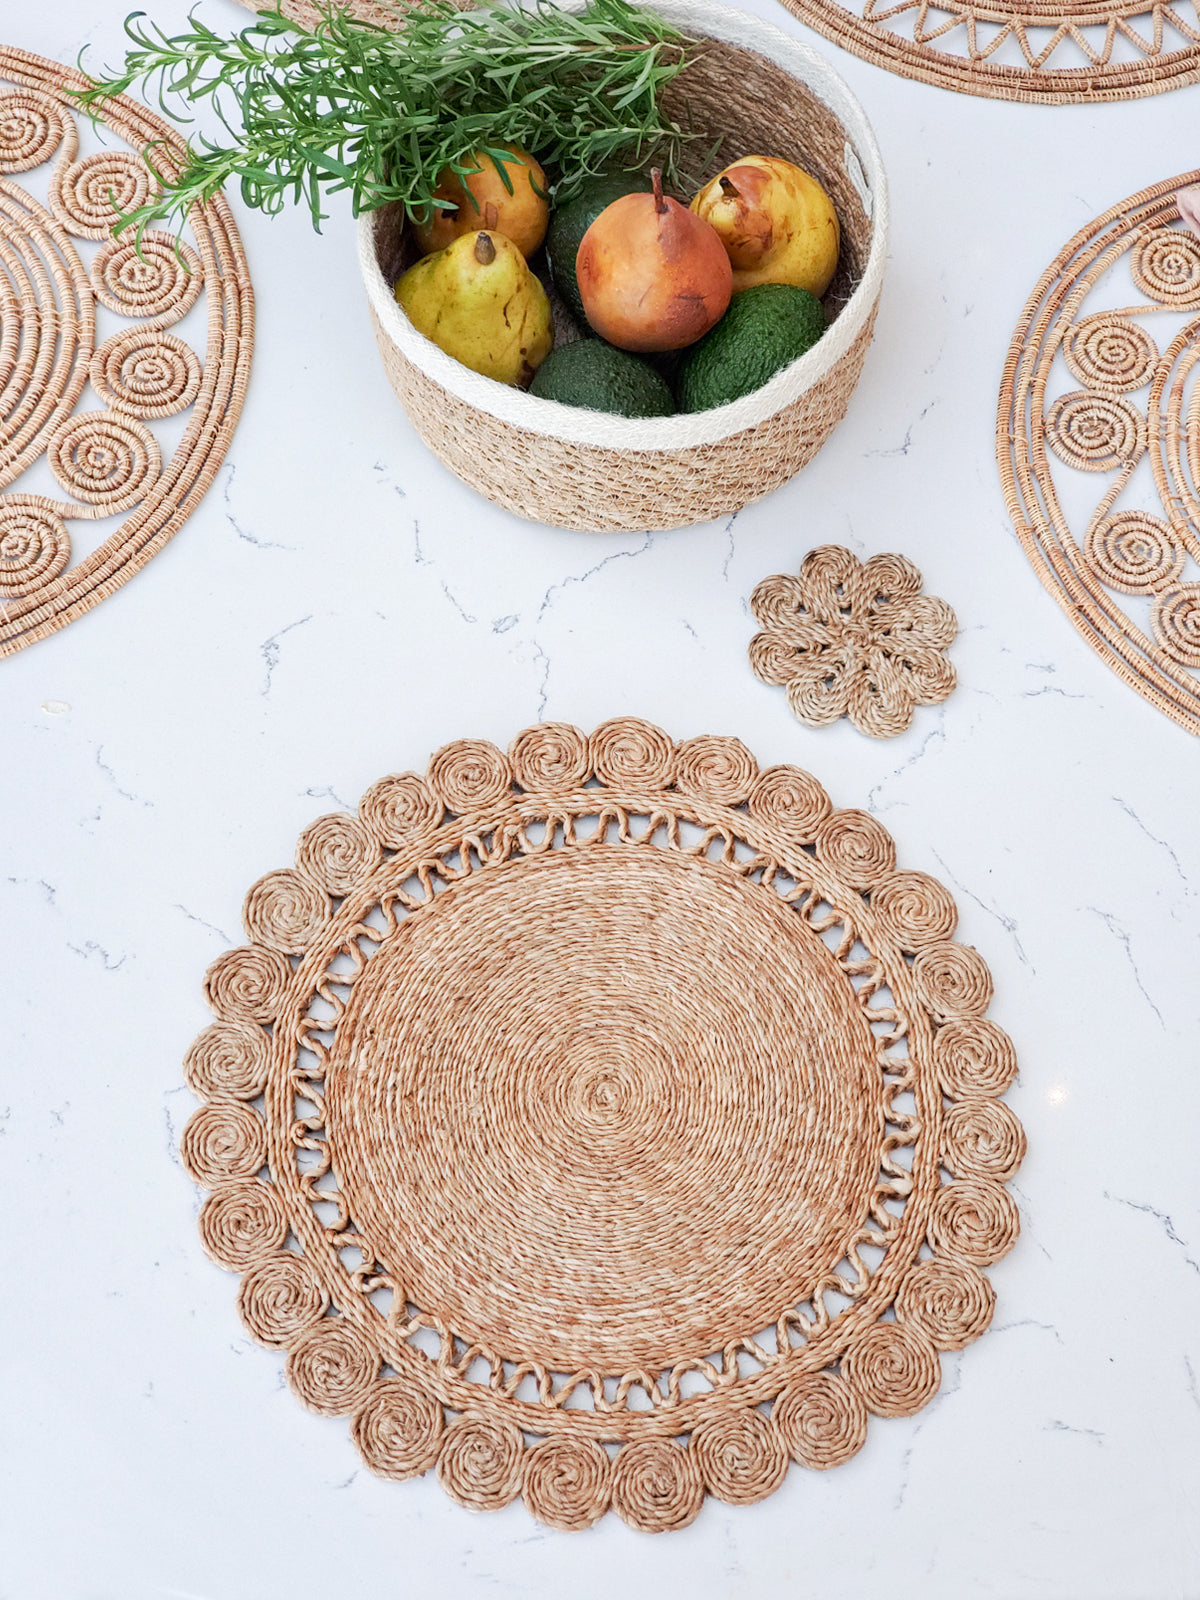 flower placemats made of jute styled with fruit bowl